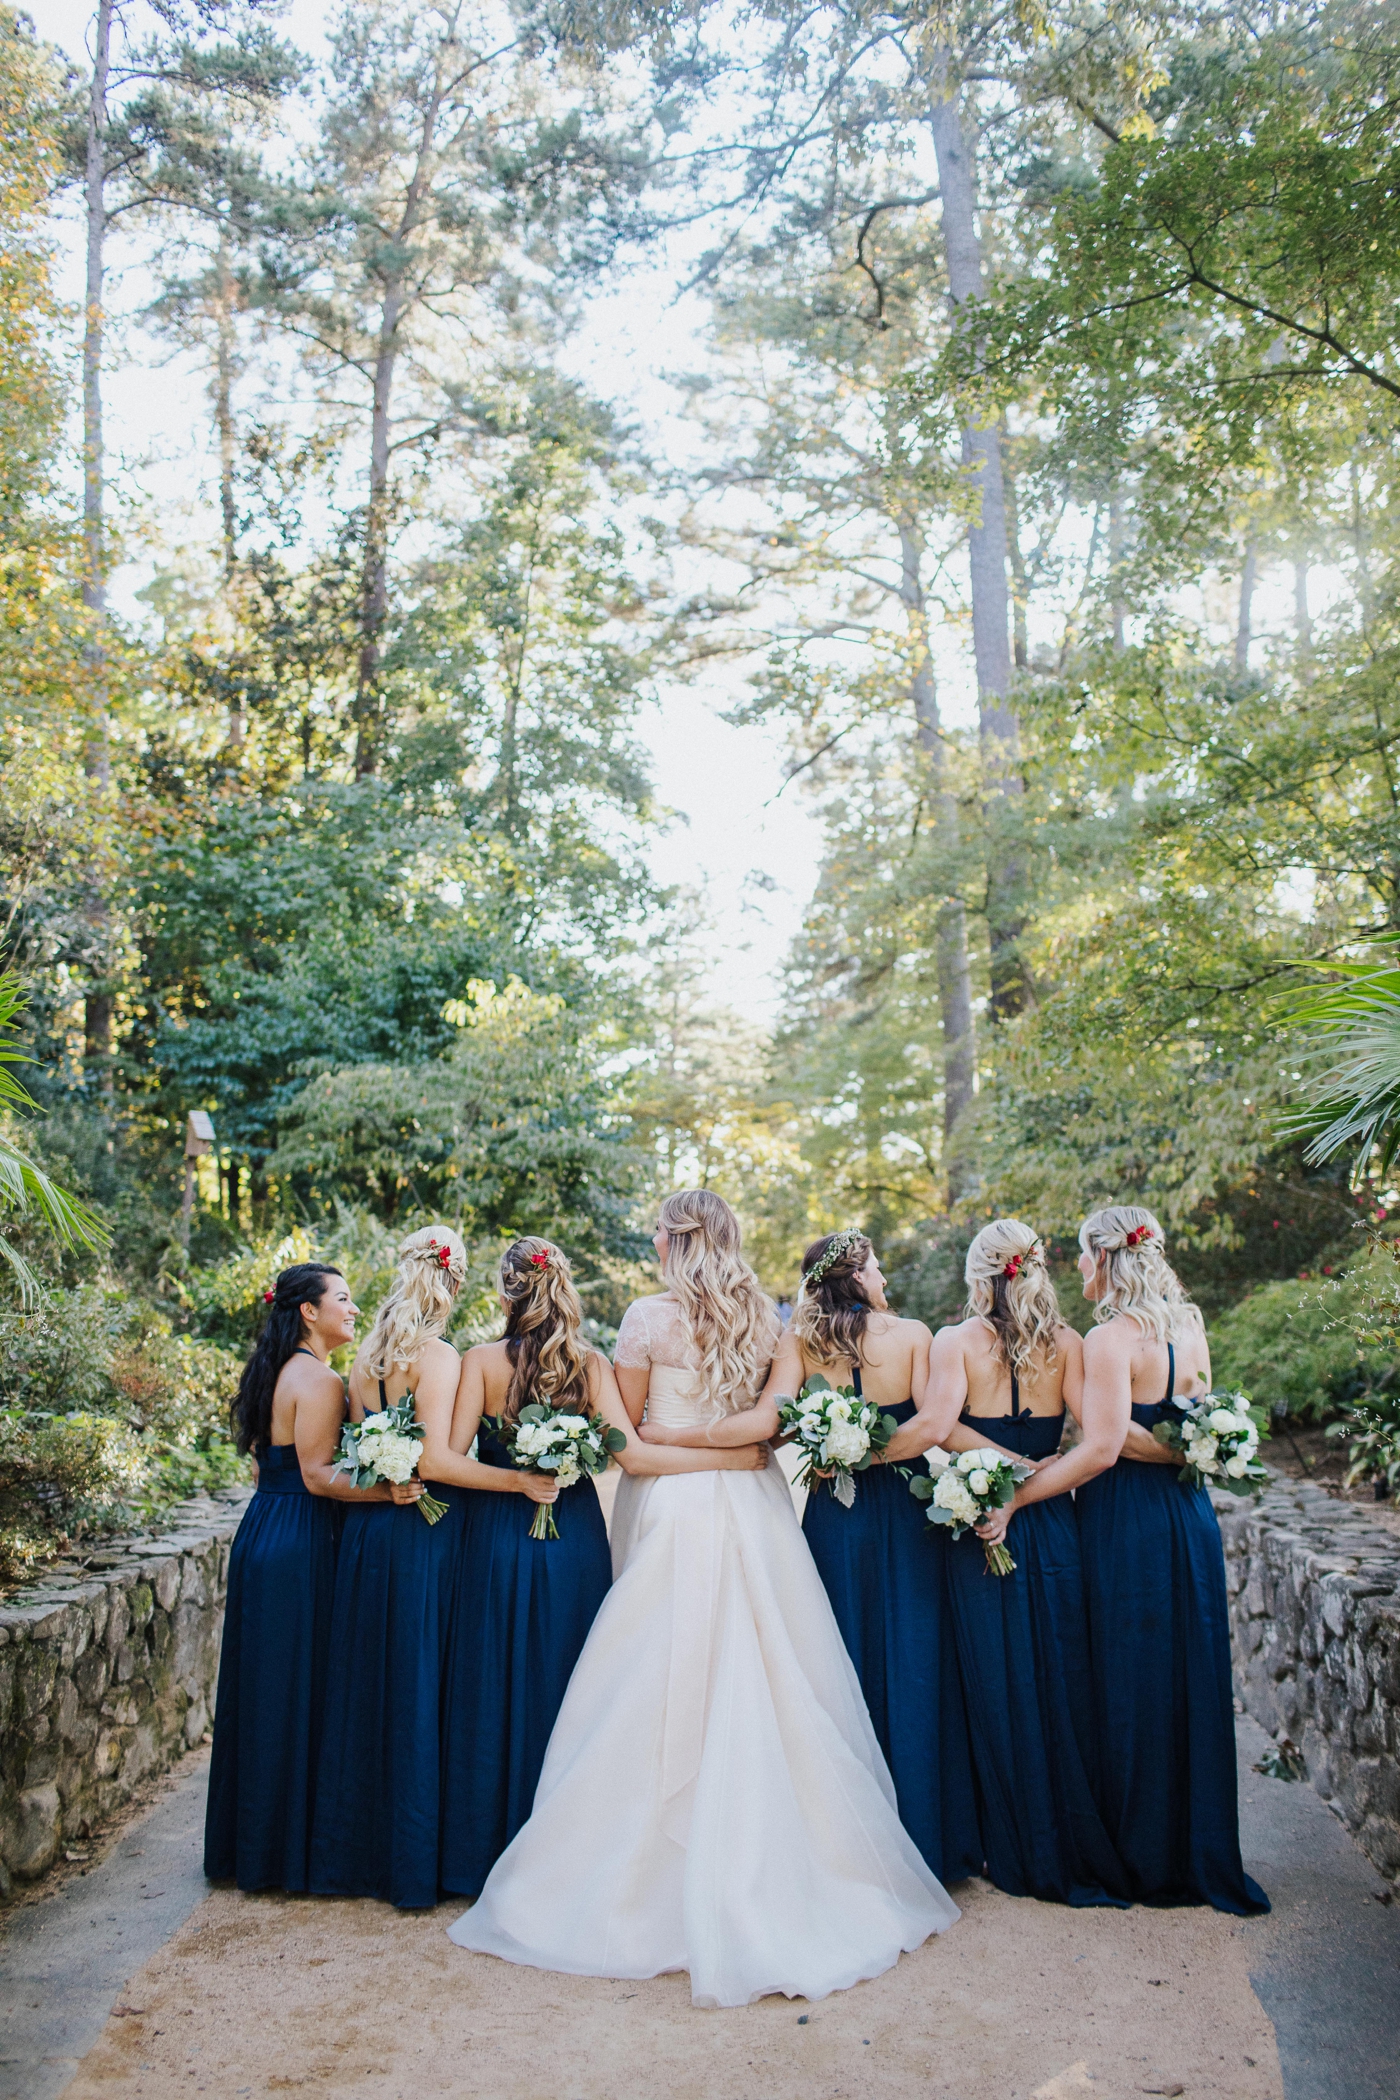 Navy blue bridesmaids gowns from David’s Bridal